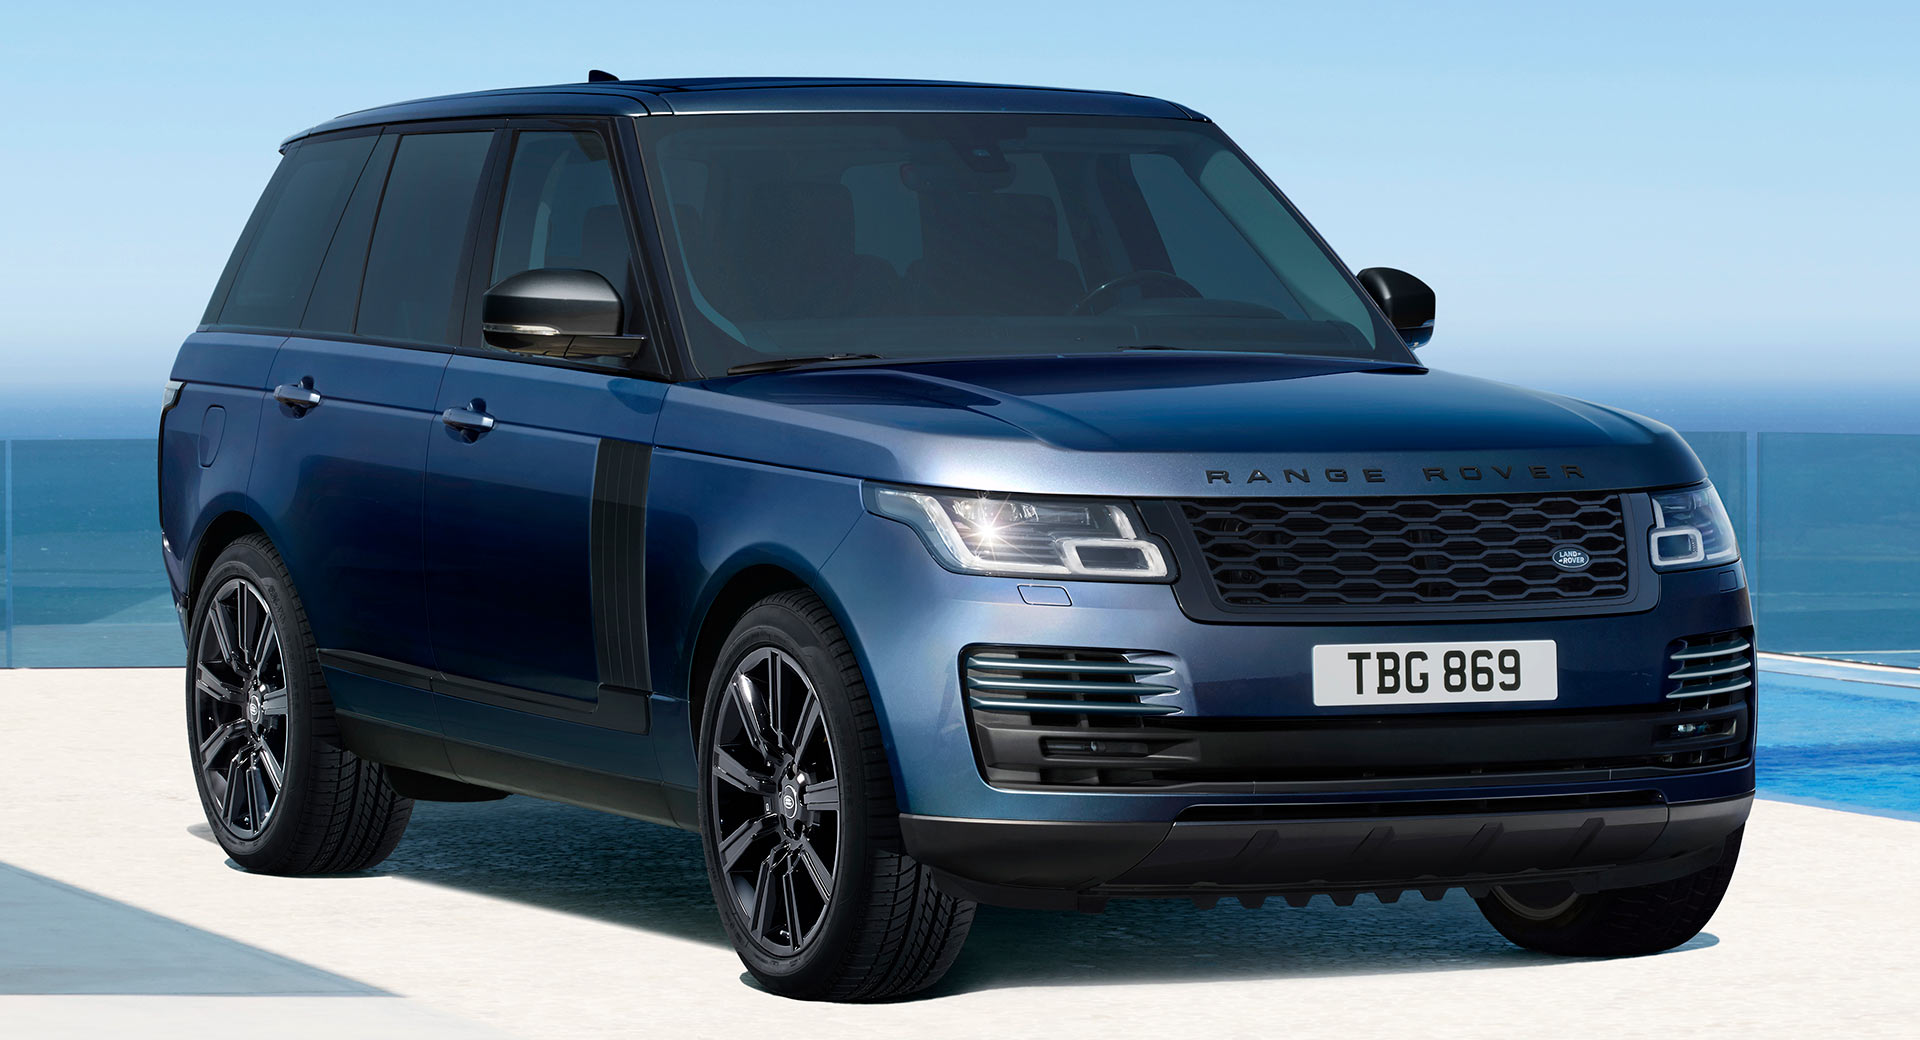 2021 Range Rover Family Lands In The U.S. With New ...